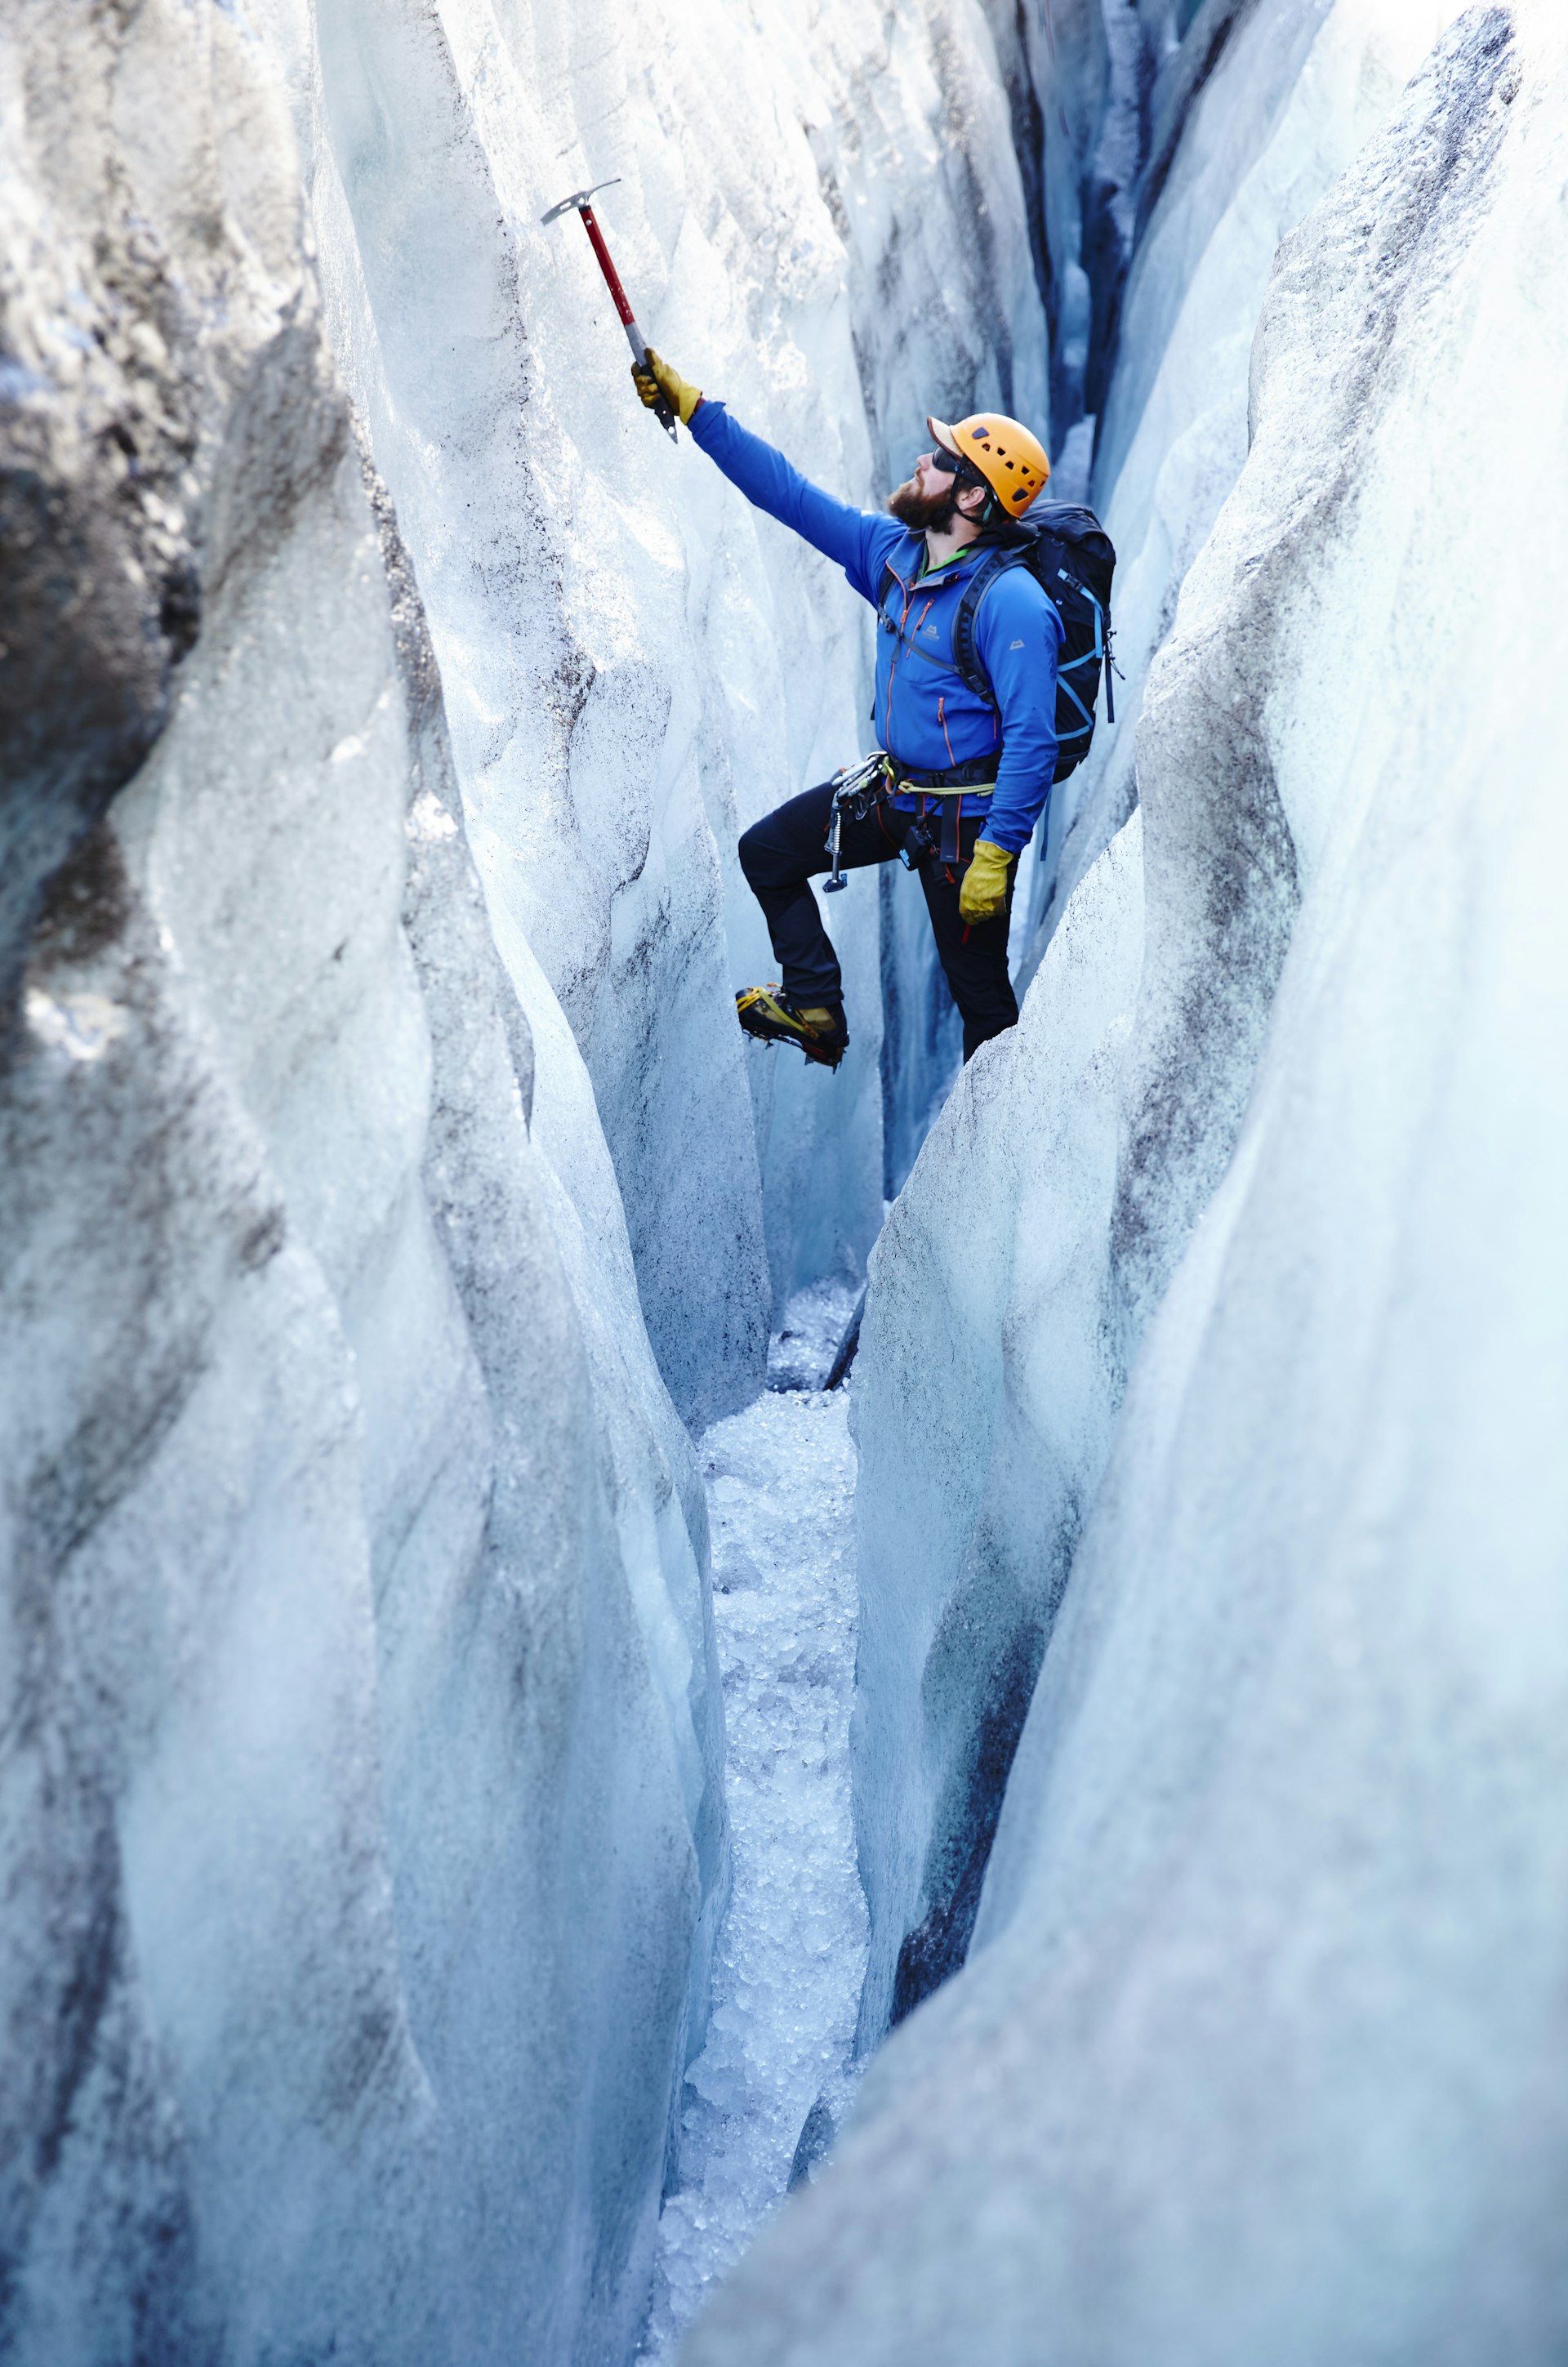 A man in climbing gear hangs off an ice-pick in an icy crevasse